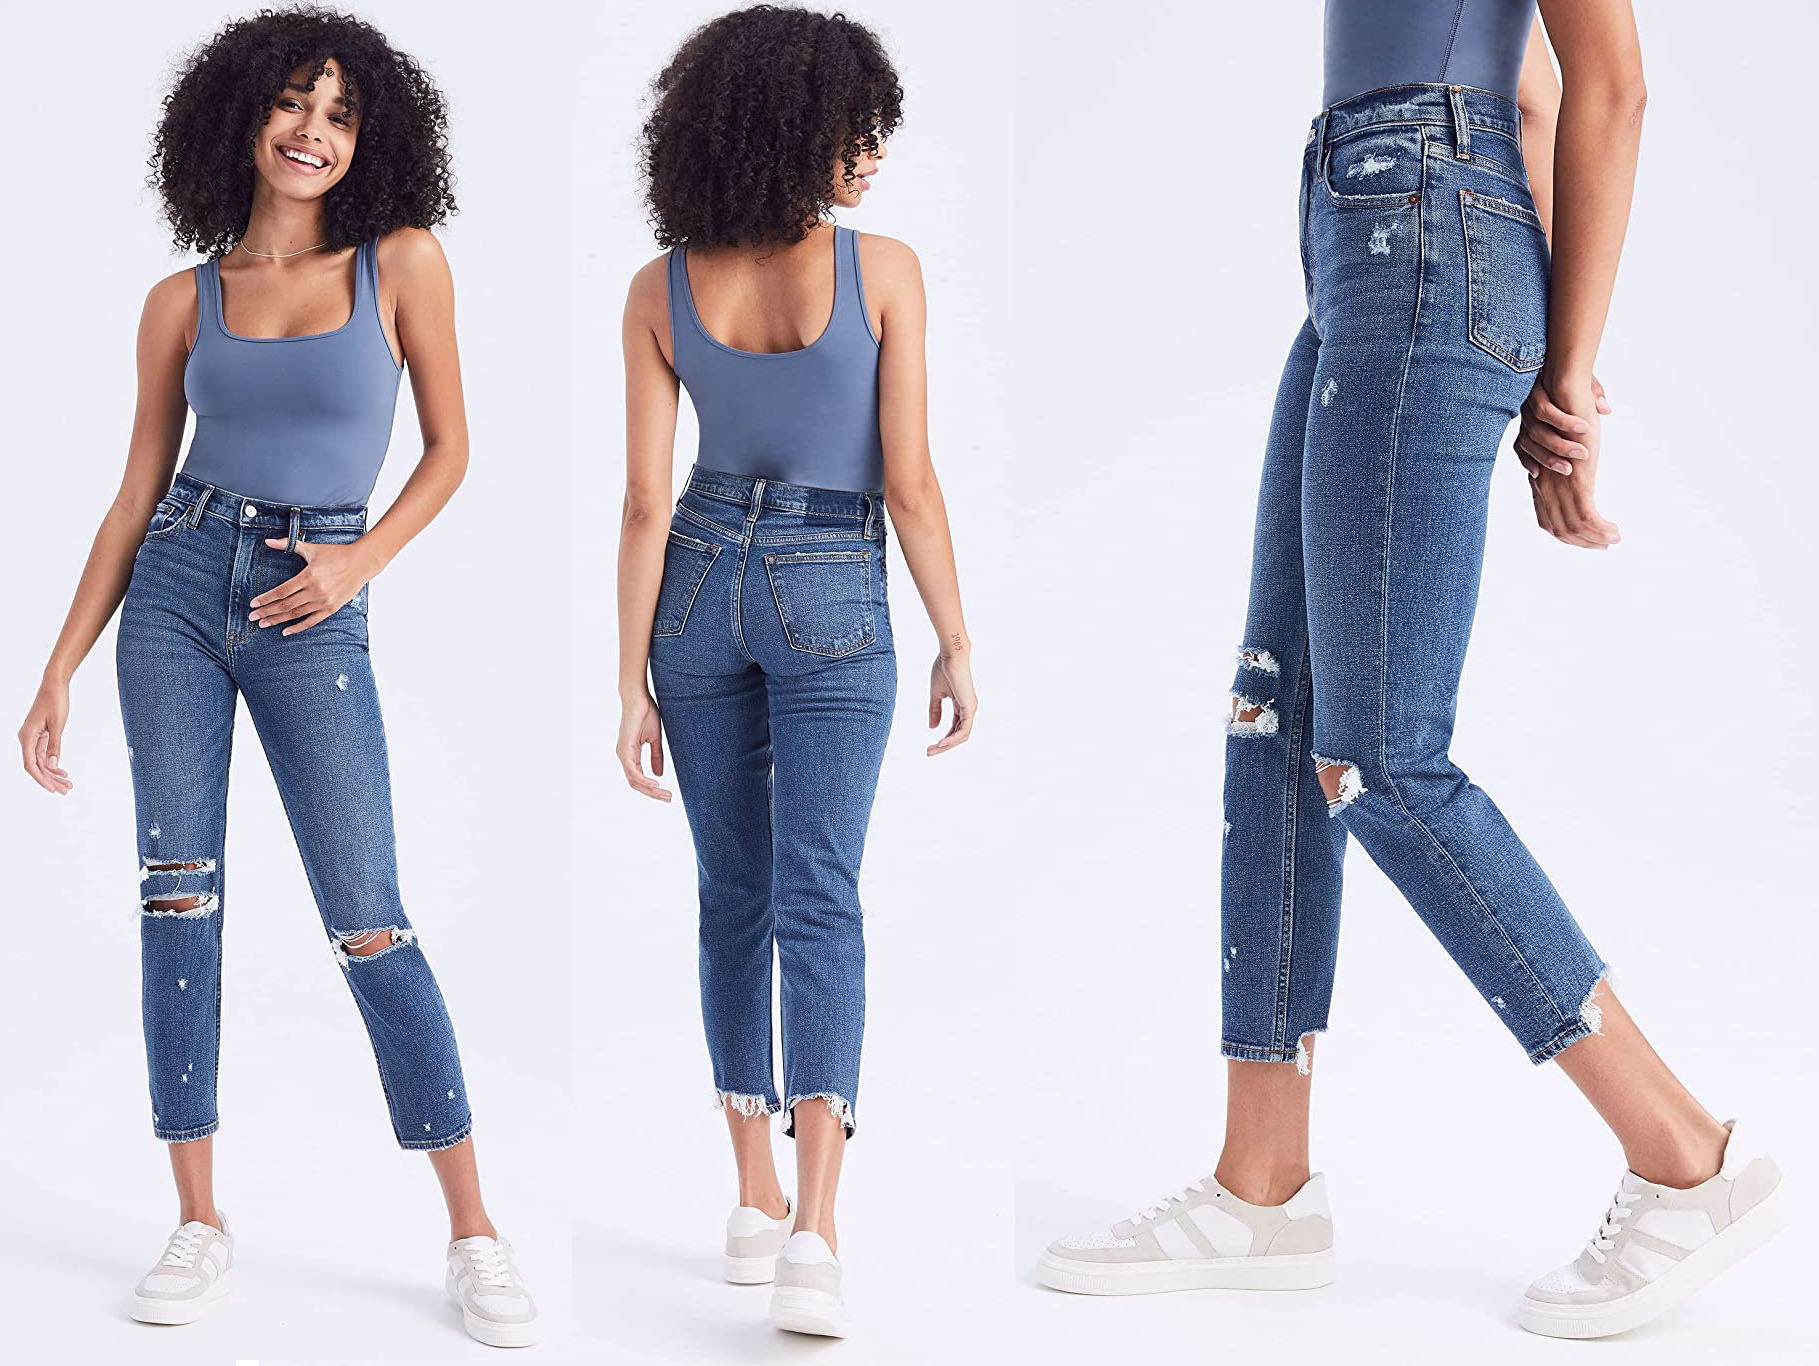 A classic style, these High Rise Mom Jeans feature trendy ripped knees and frayed hem